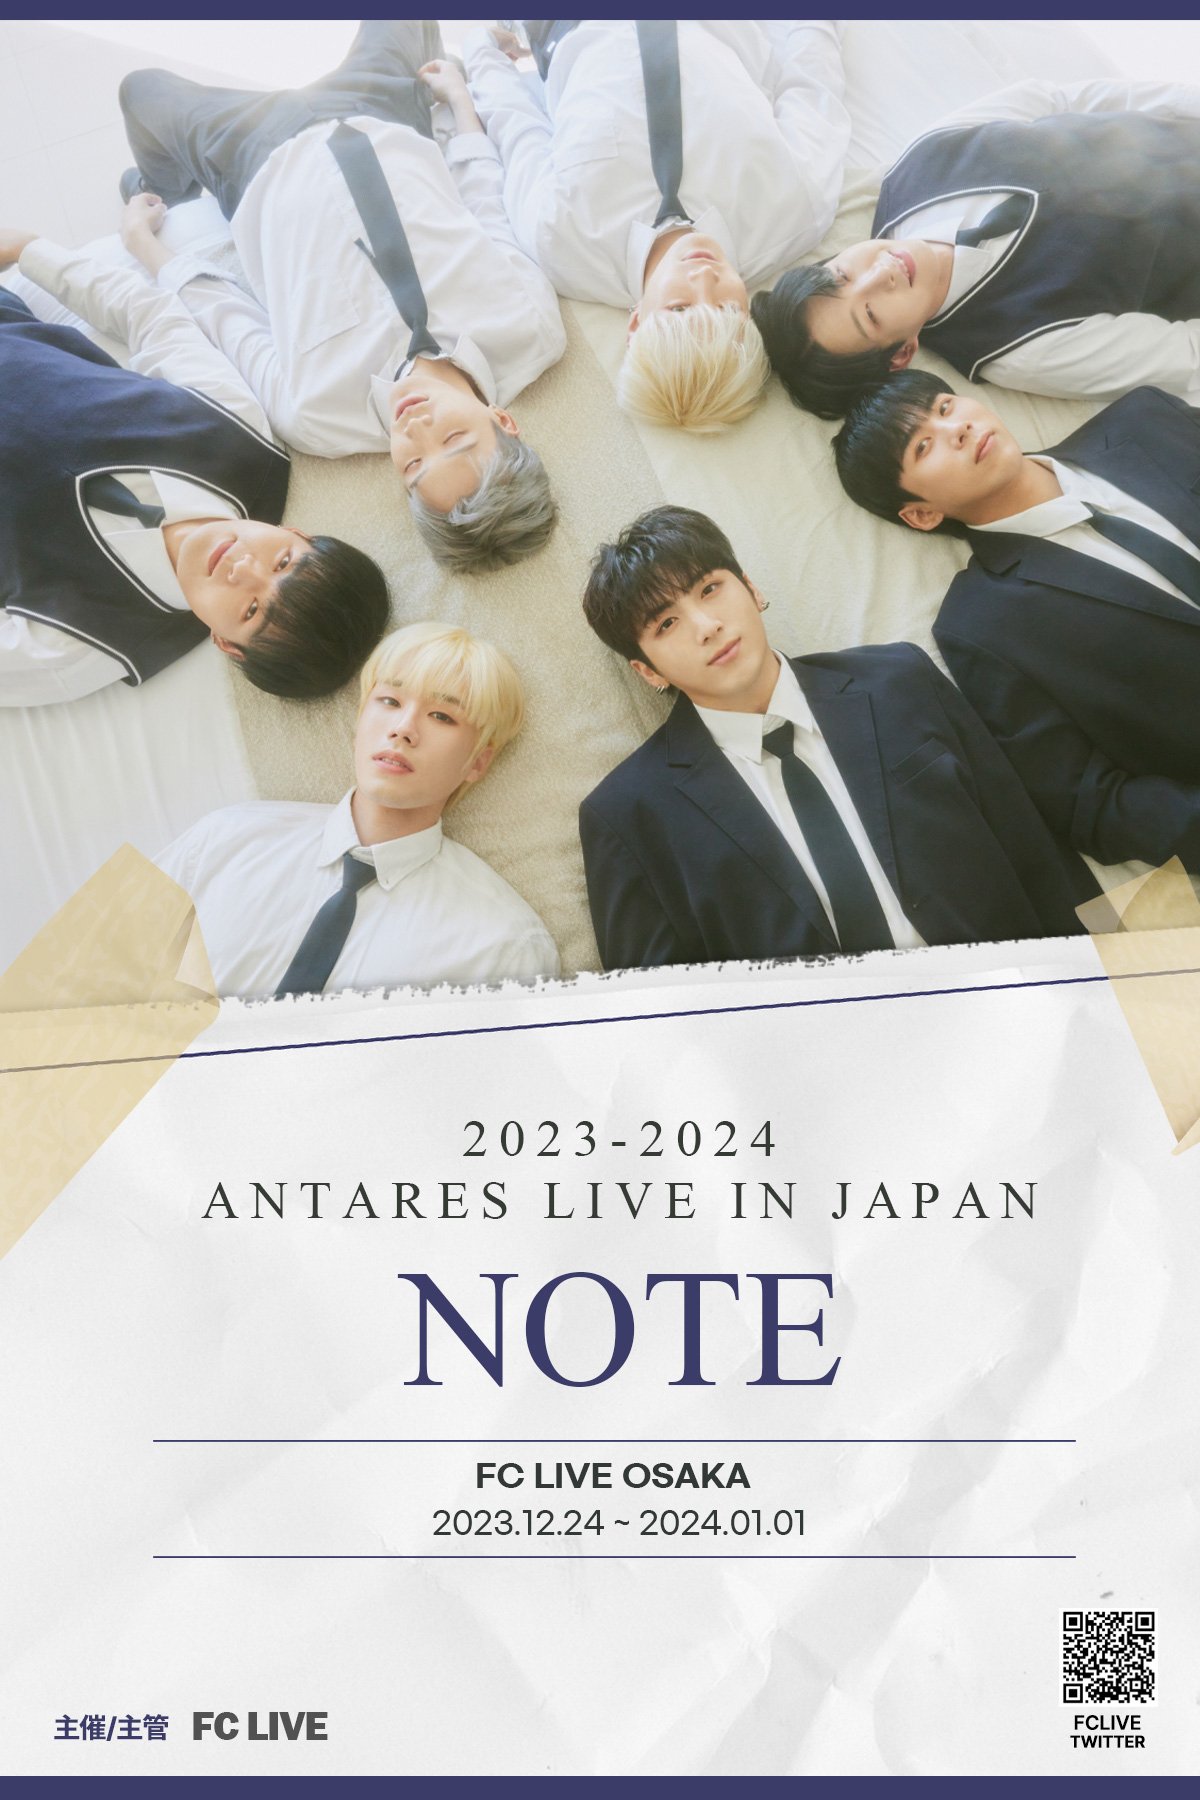 2023 2024 ANTARES LIVE IN JAPAN NOTE ※無料DAY